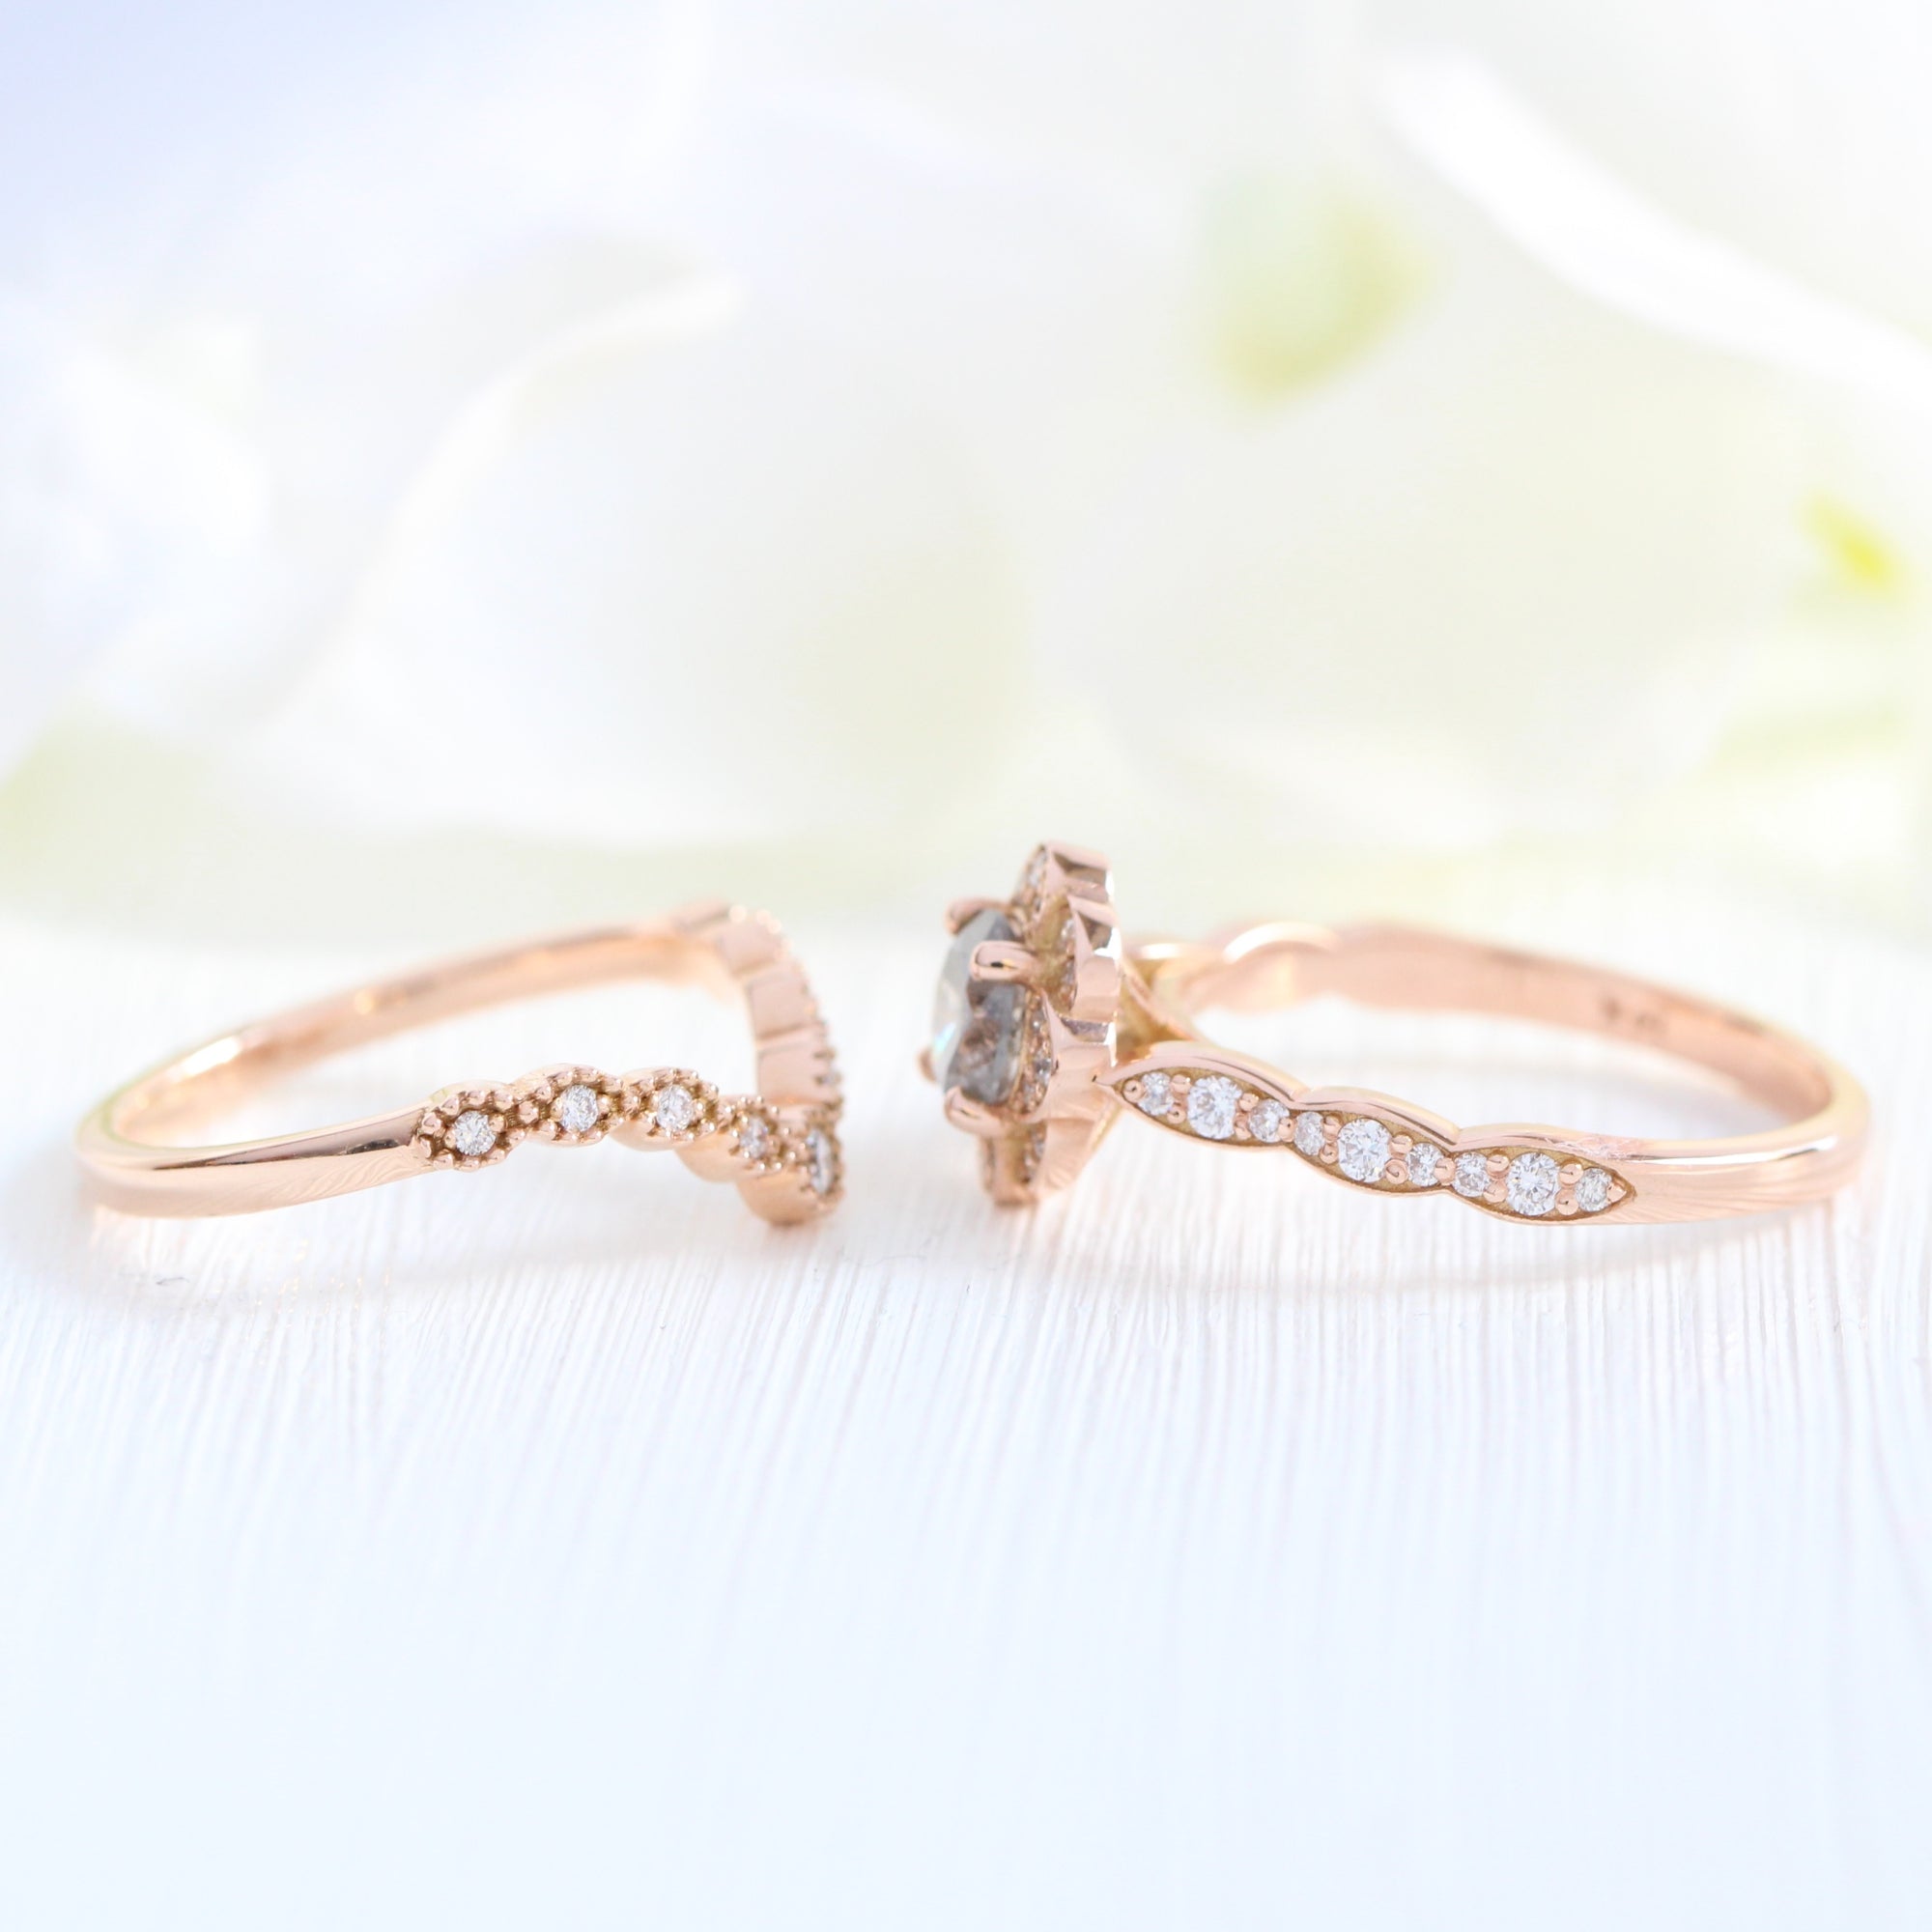 Natural salt and pepper diamond ring rose gold grey diamond vintage halo ring la more design jewelry